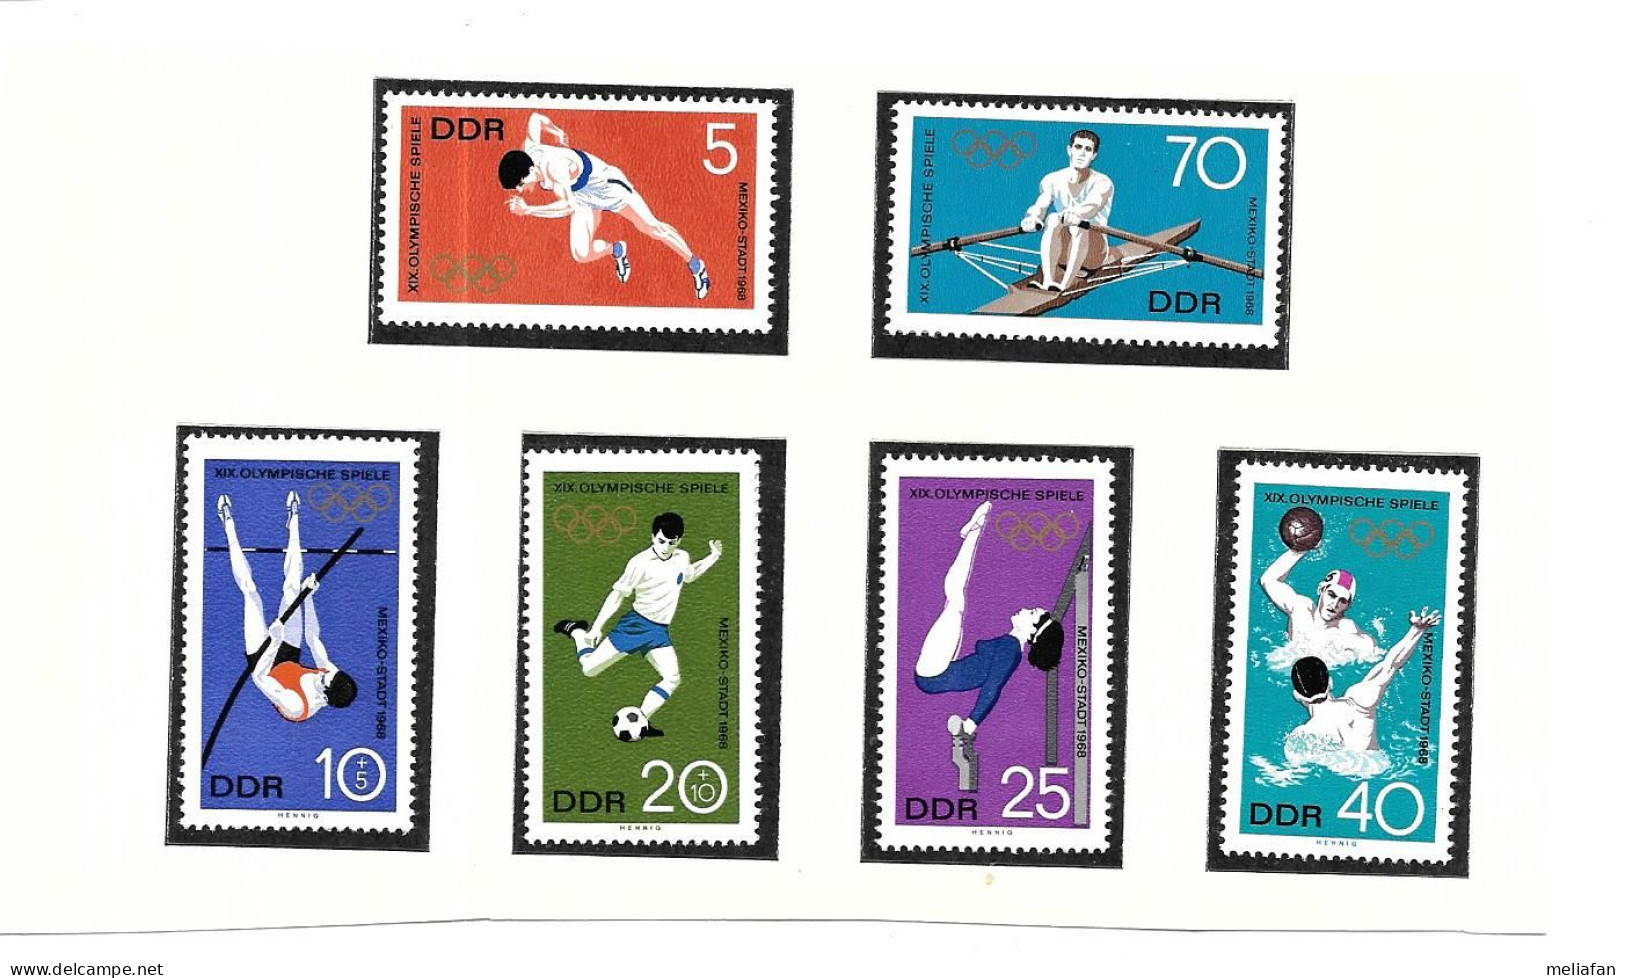 DF96 - TIMBRES POSTE DDR - JEUX OLYMPIQUES MEXICO - AVIRON - FOOTBALL - WATER POLO - GYMNASTIQUE - ATHLETISME - Summer 1968: Mexico City